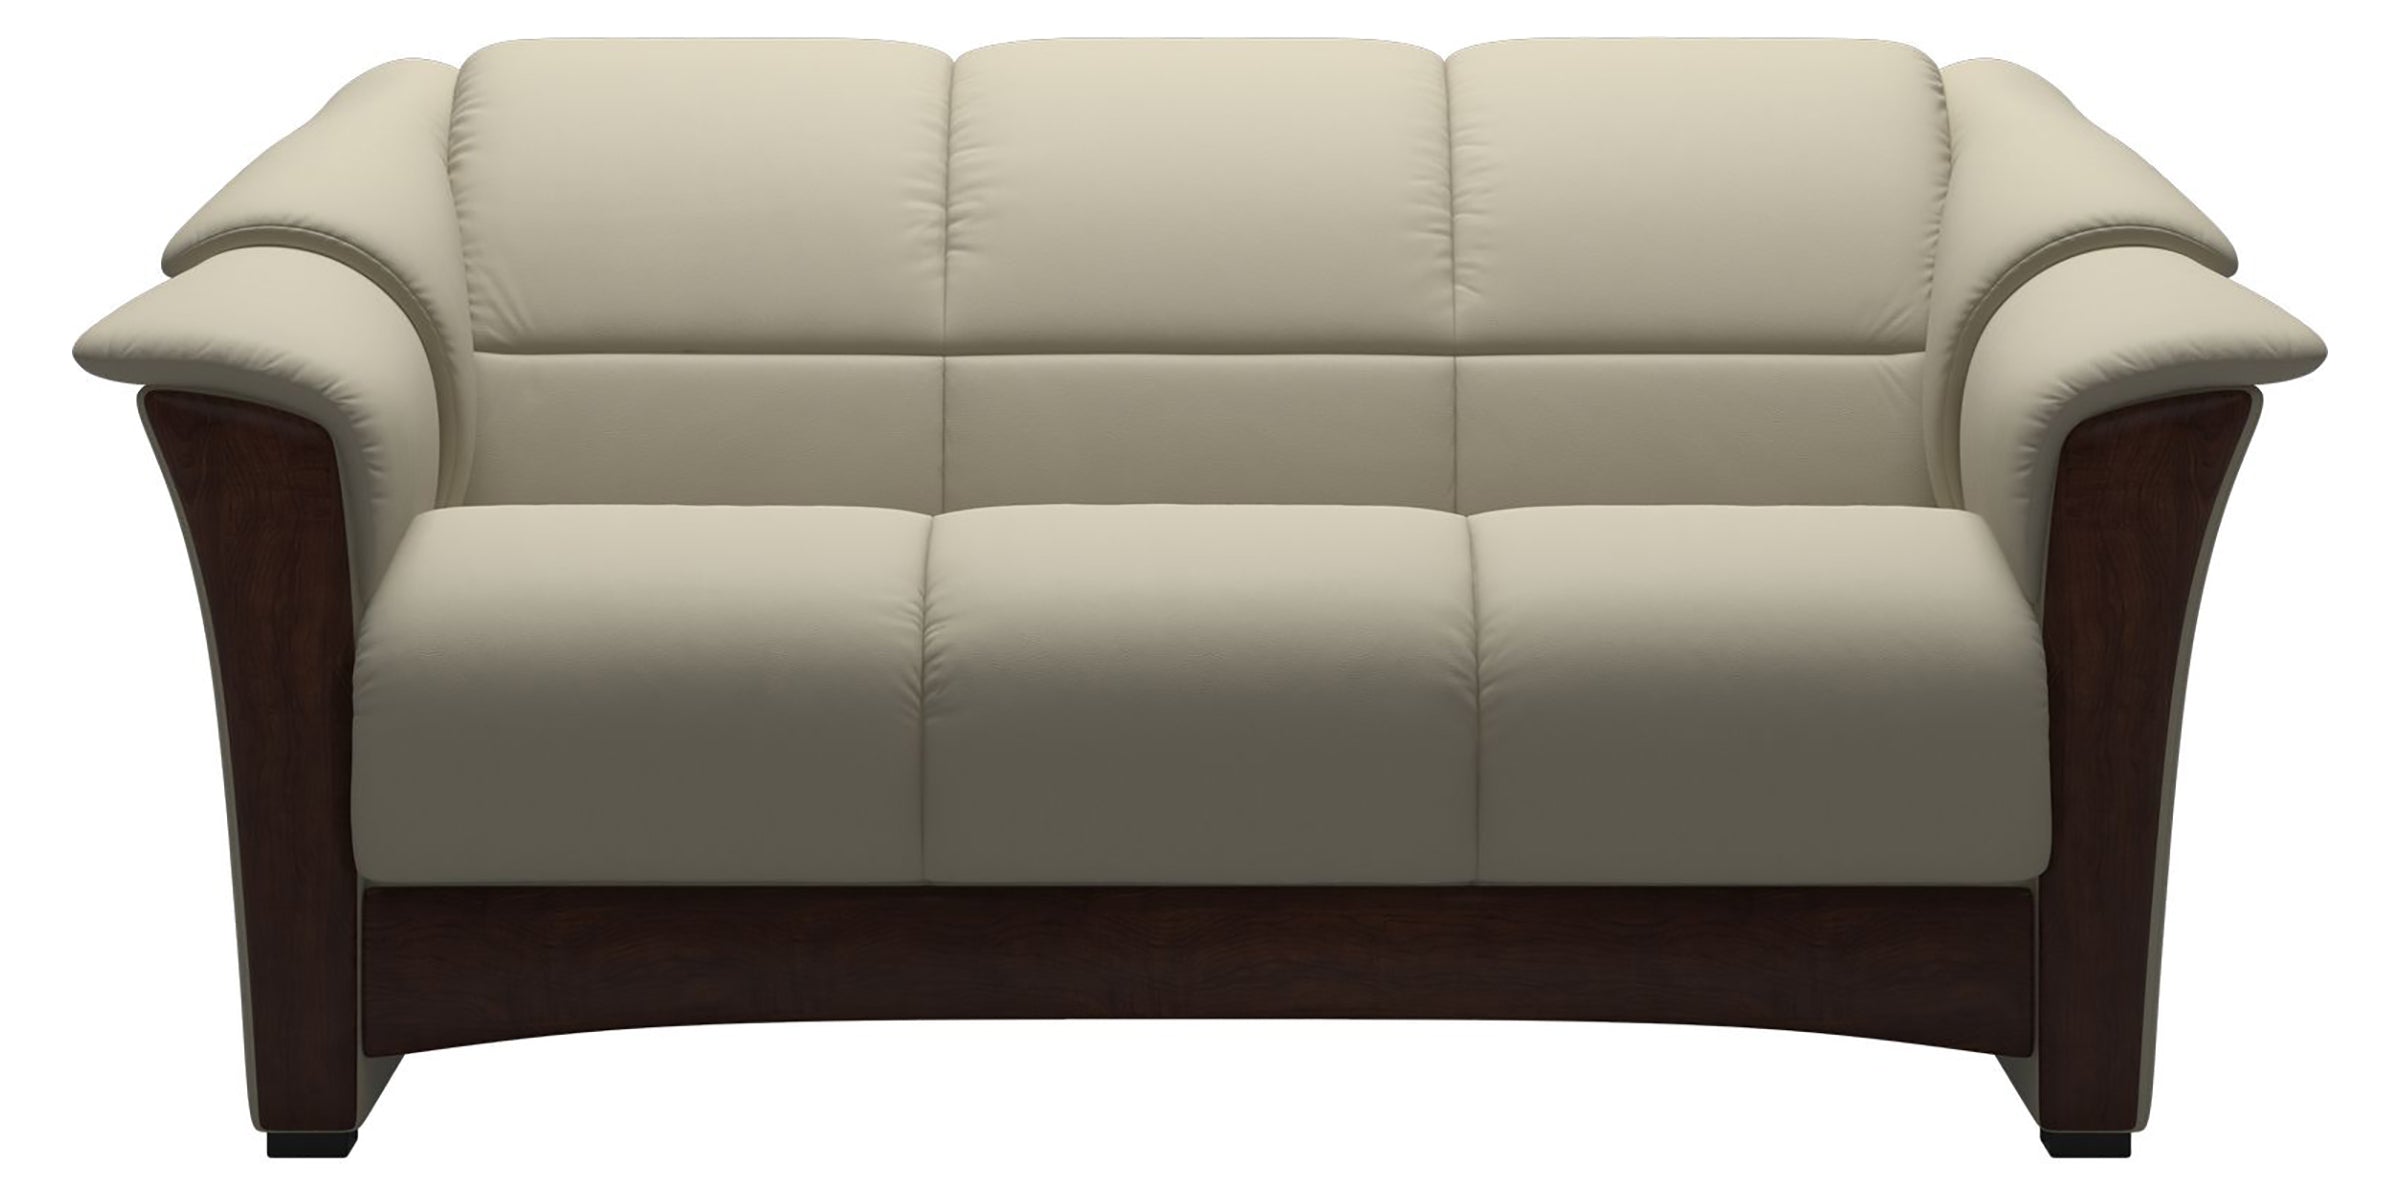 Paloma Leather Light Grey and Brown Base | Stressless Oslo Loveseat | Valley Ridge Furniture